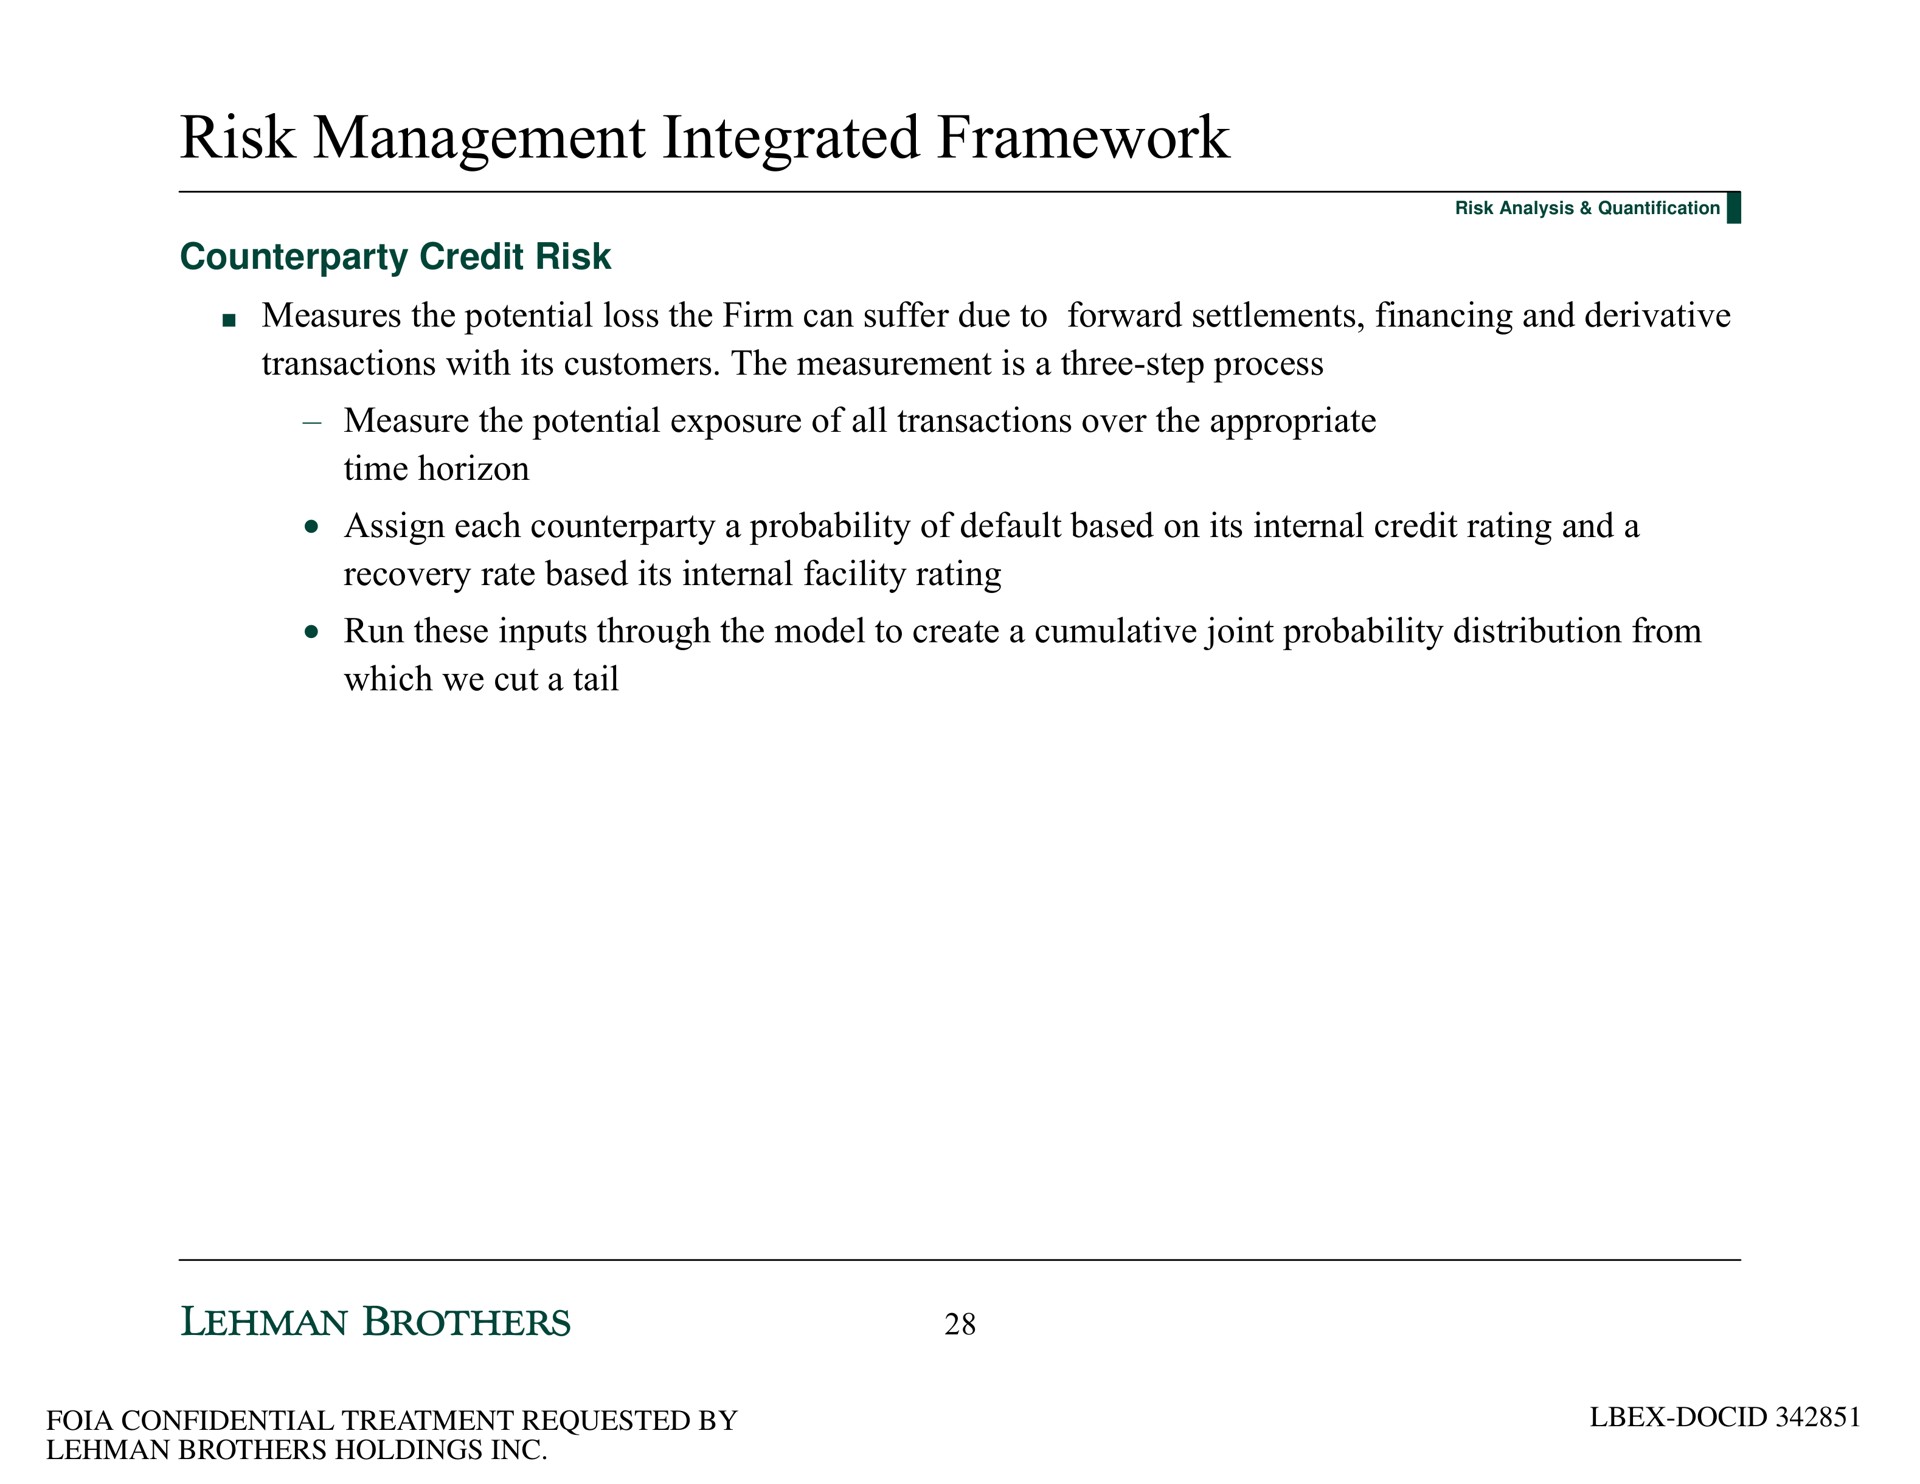 risk management integrated framework credit risk measures the potential loss the firm can suffer due to forward settlements financing and derivative transactions with its customers the measurement is a three step process measure the potential exposure of all transactions over the appropriate time horizon assign each a probability of default based on its internal credit rating and a recovery rate based its internal facility rating run these inputs through the model to create a cumulative joint probability distribution from which we cut a tail | Lehman Brothers